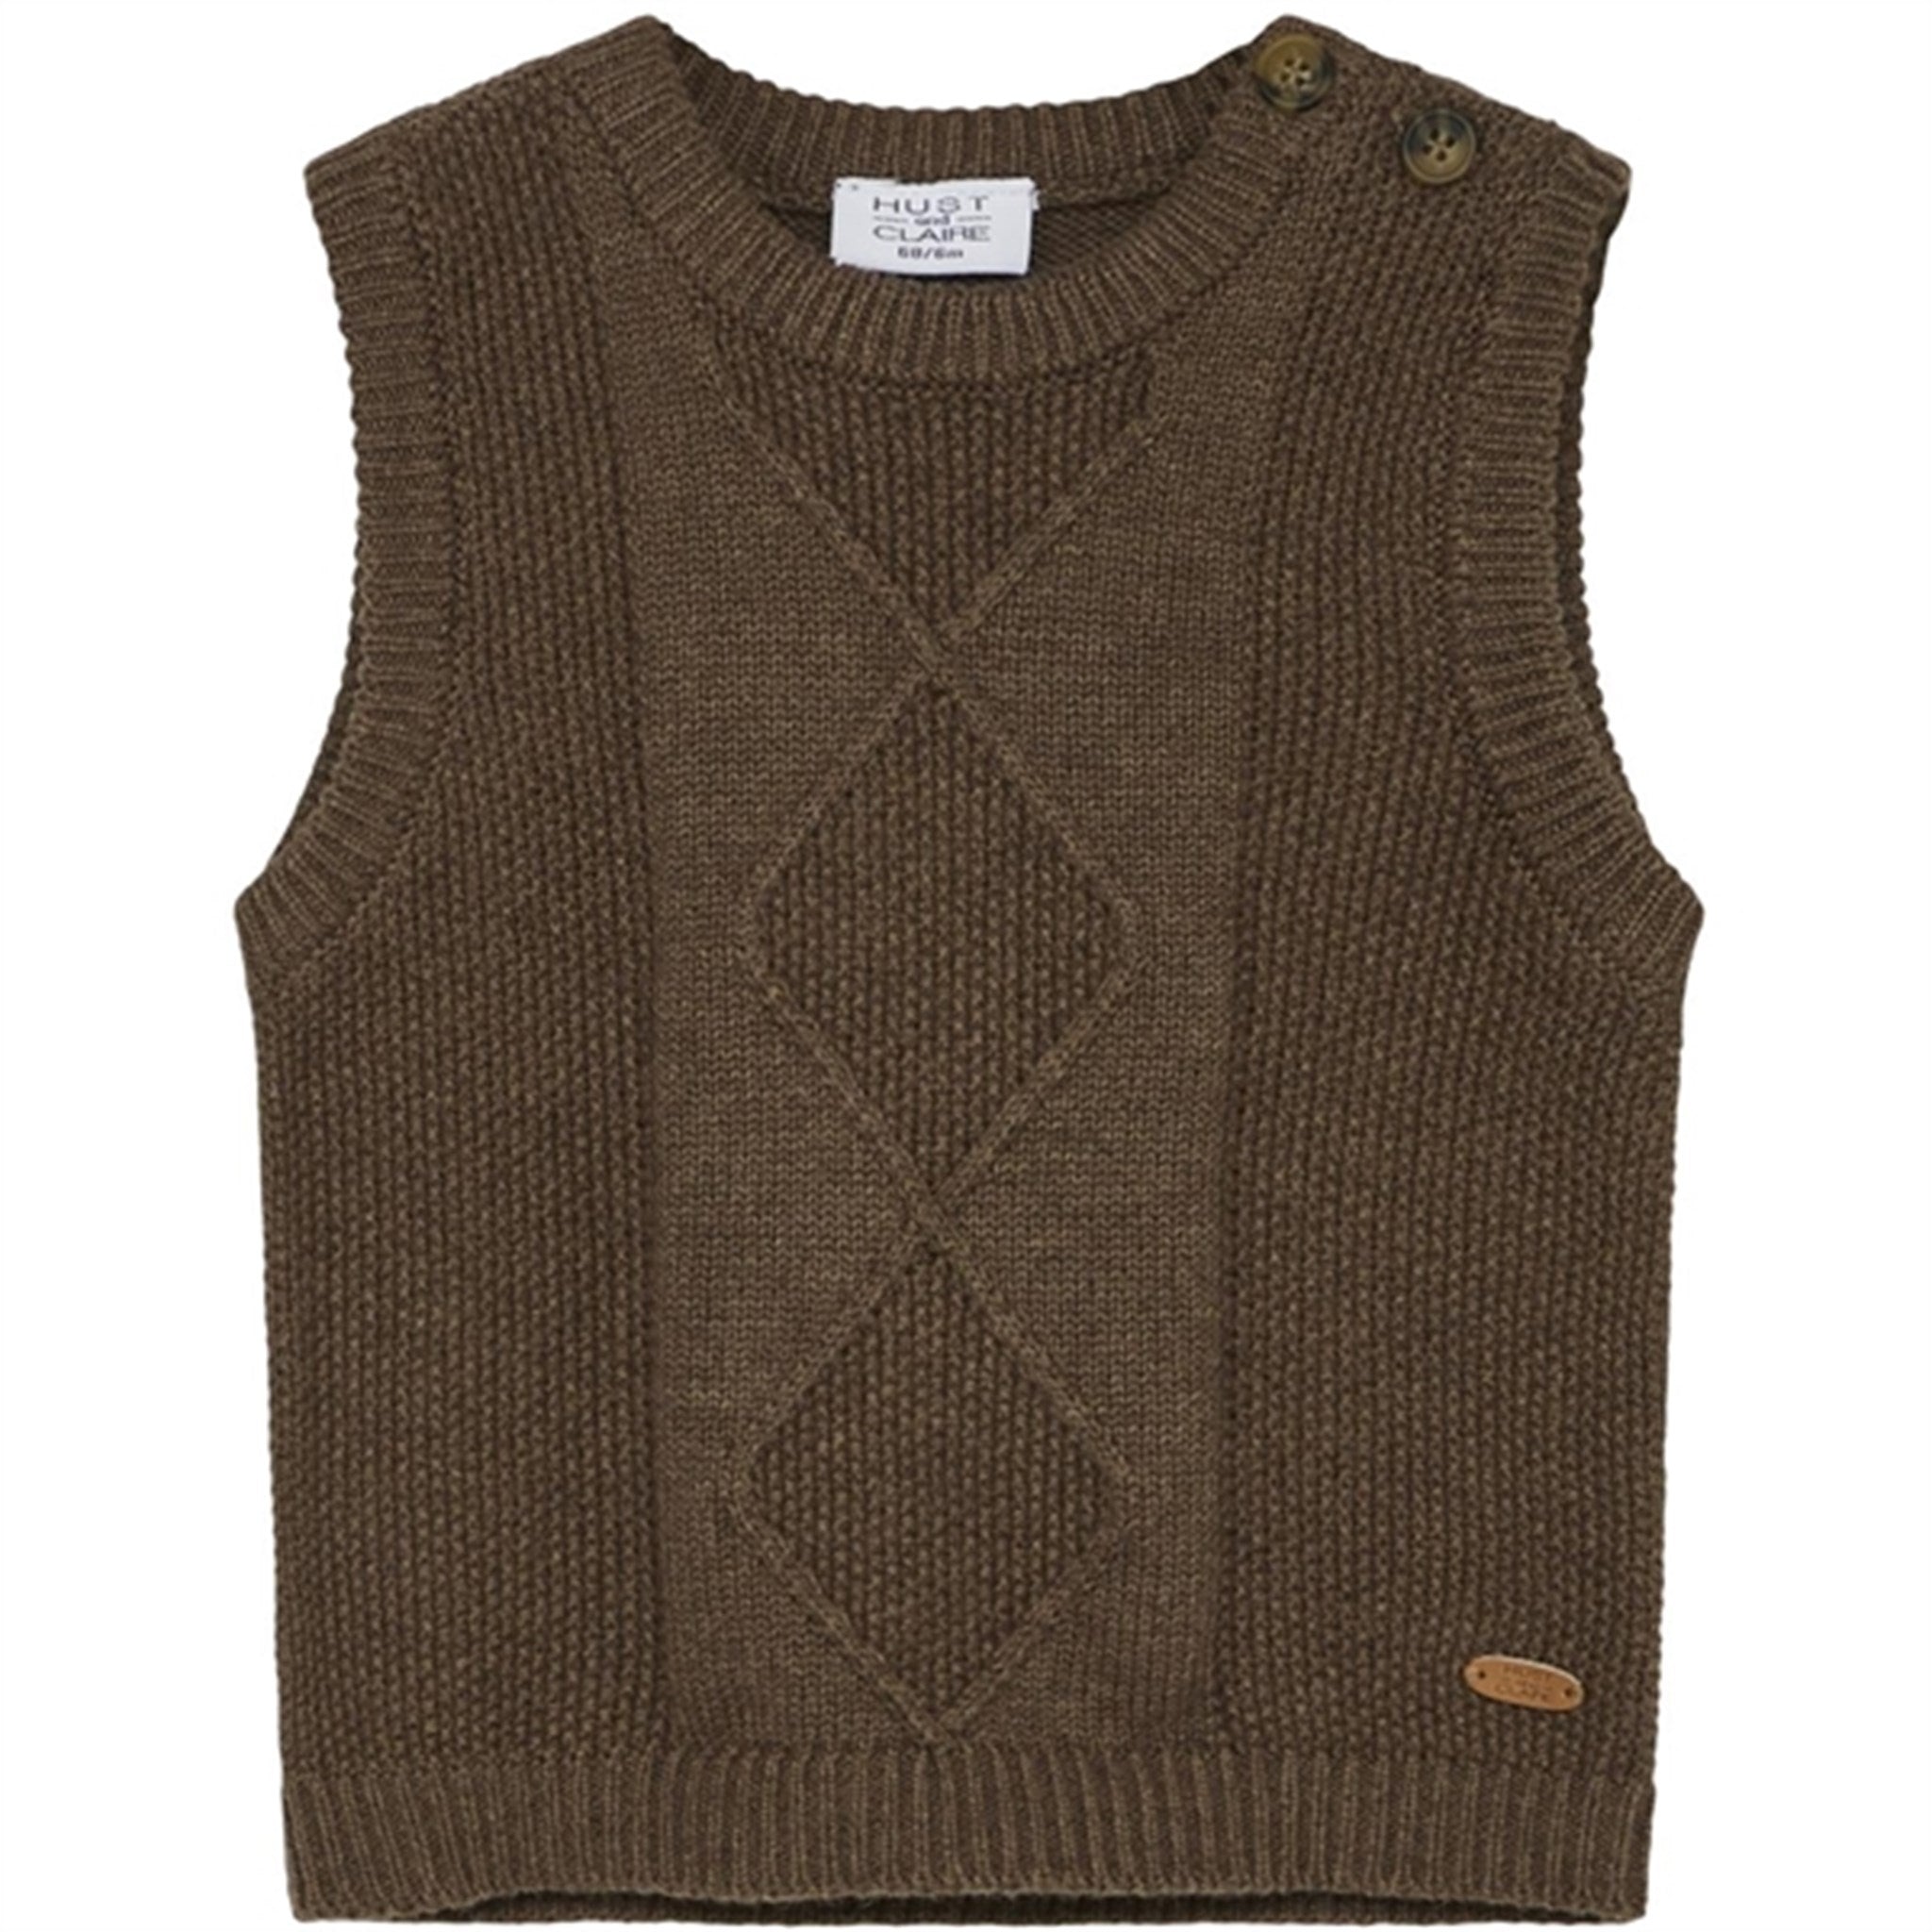 Hust & Claire Baby Cub Brown Perrie Vest